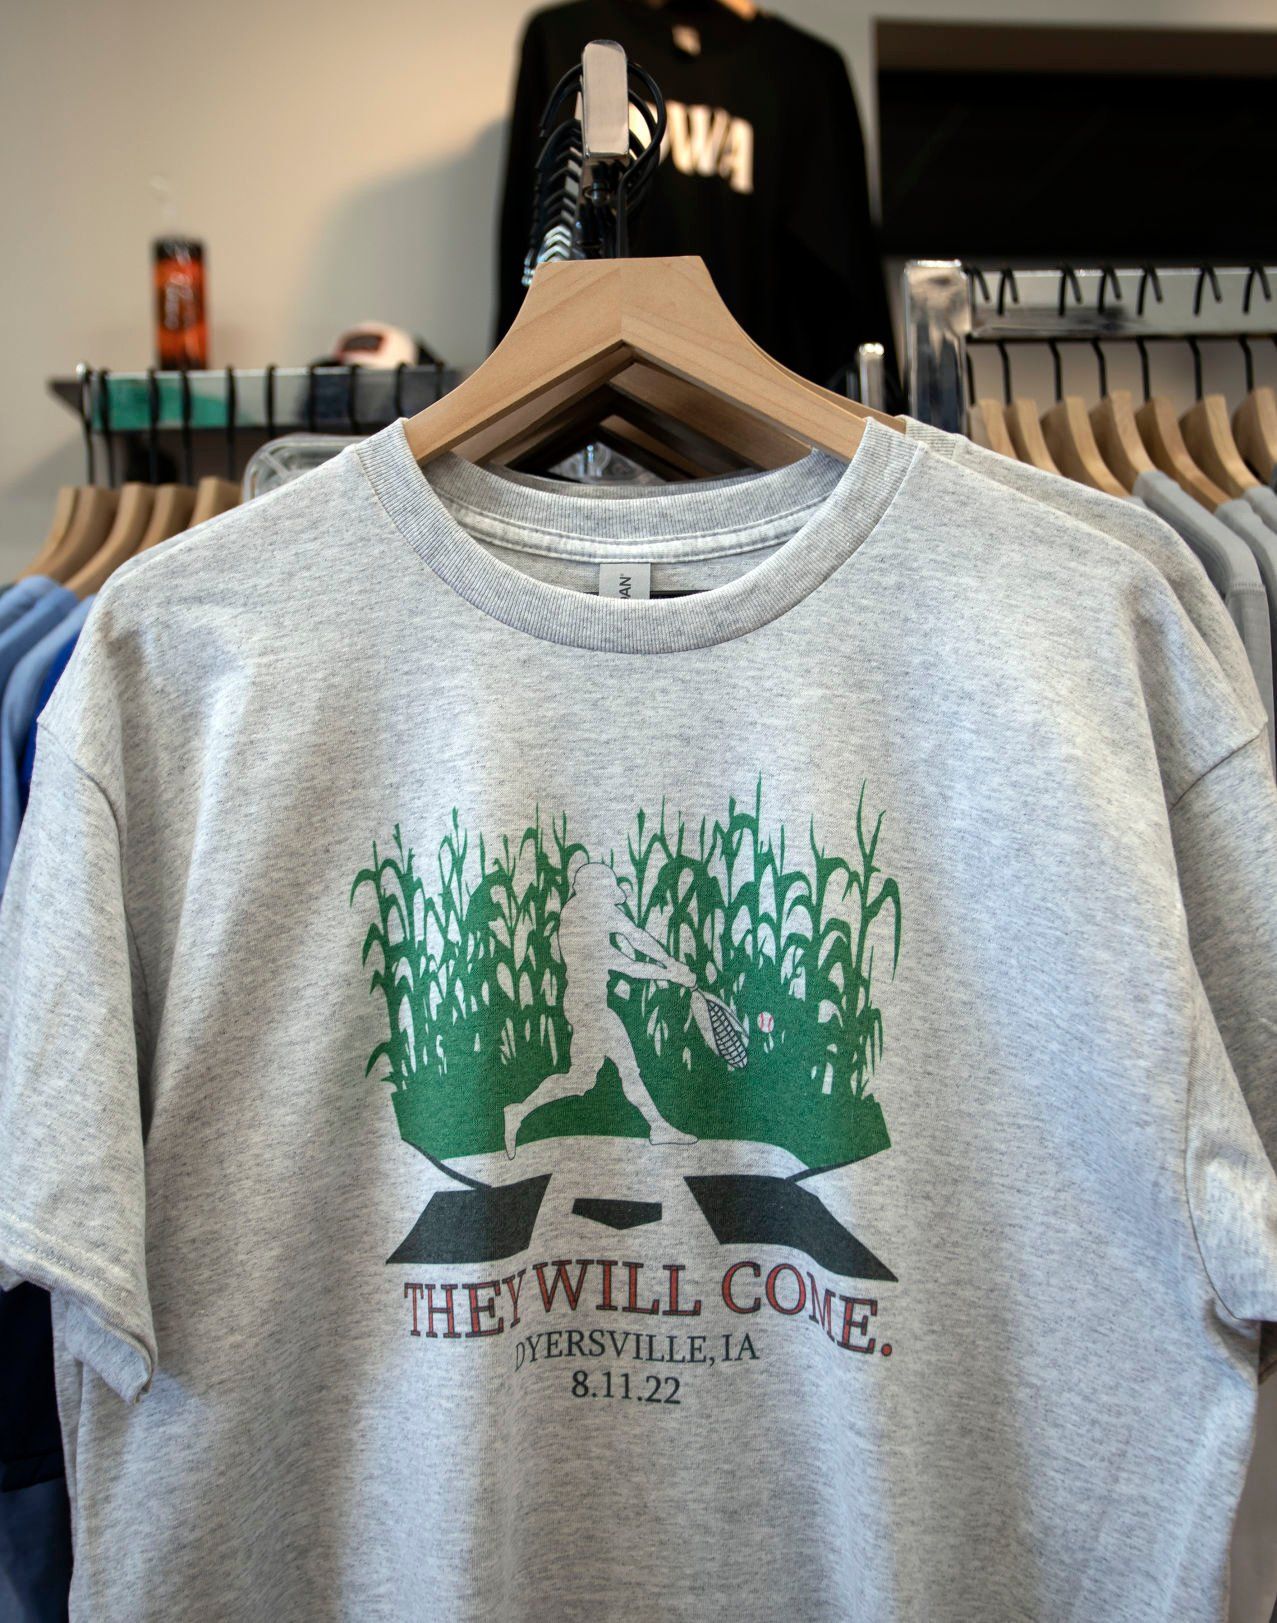 A Field of Dreams-themed shirt is on sale at Haberdash Outfitters Co. in Dyersville, Iowa. Photo Taken Tuesday, August 2, 2022.    PHOTO CREDIT: Stephen Gassman